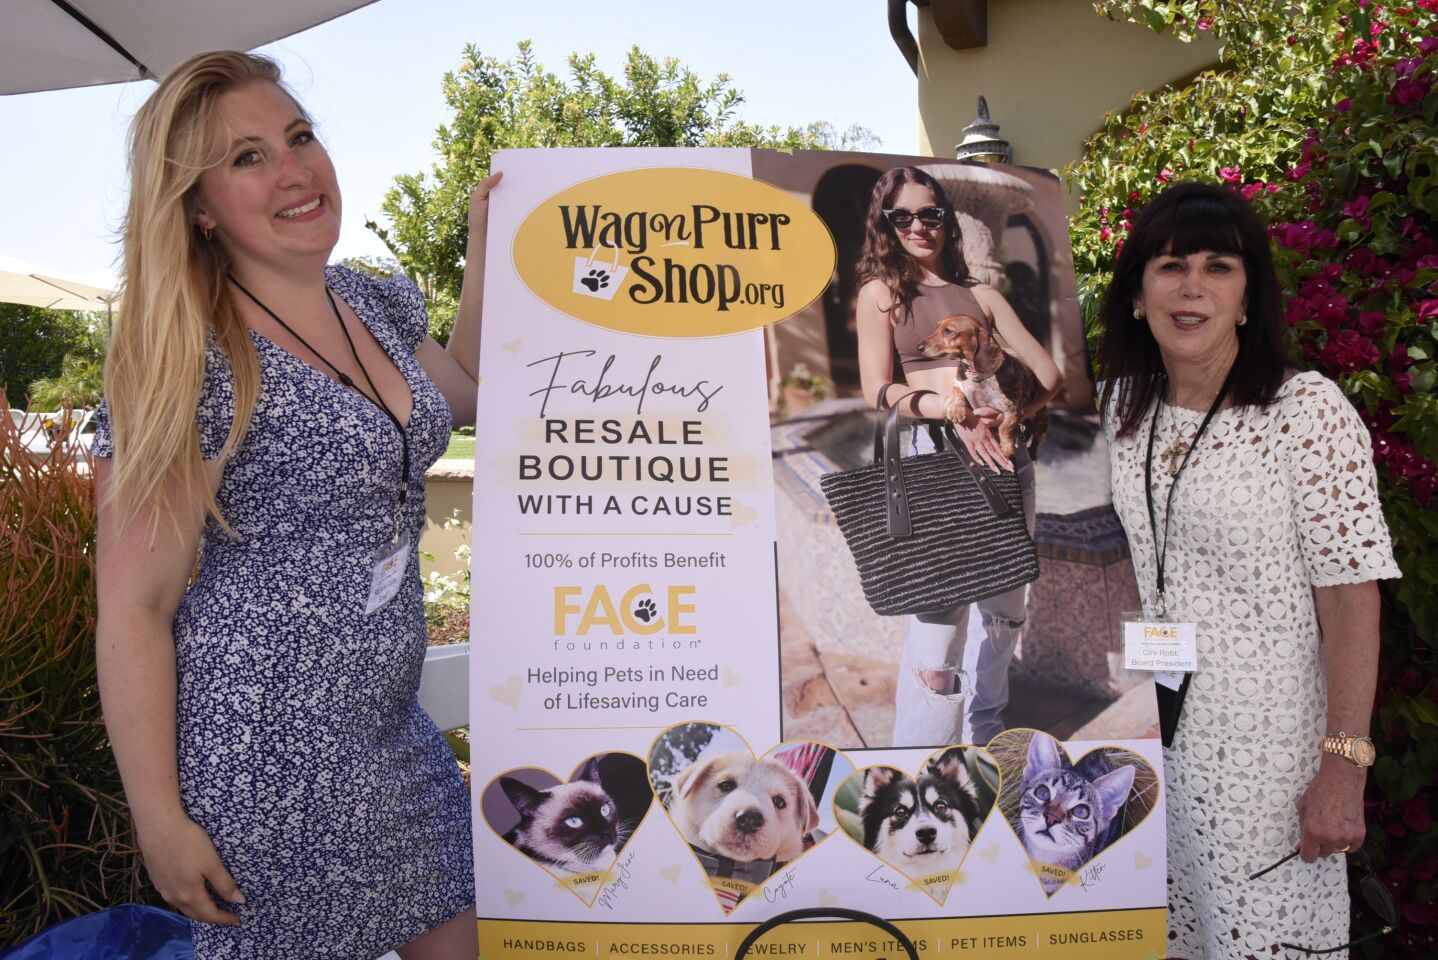 Marketing Director Nichole Gray, FACE Foundation Board President/Founder Cini Robb with sign promoting FF online shop (Wagnpurrshop.org)